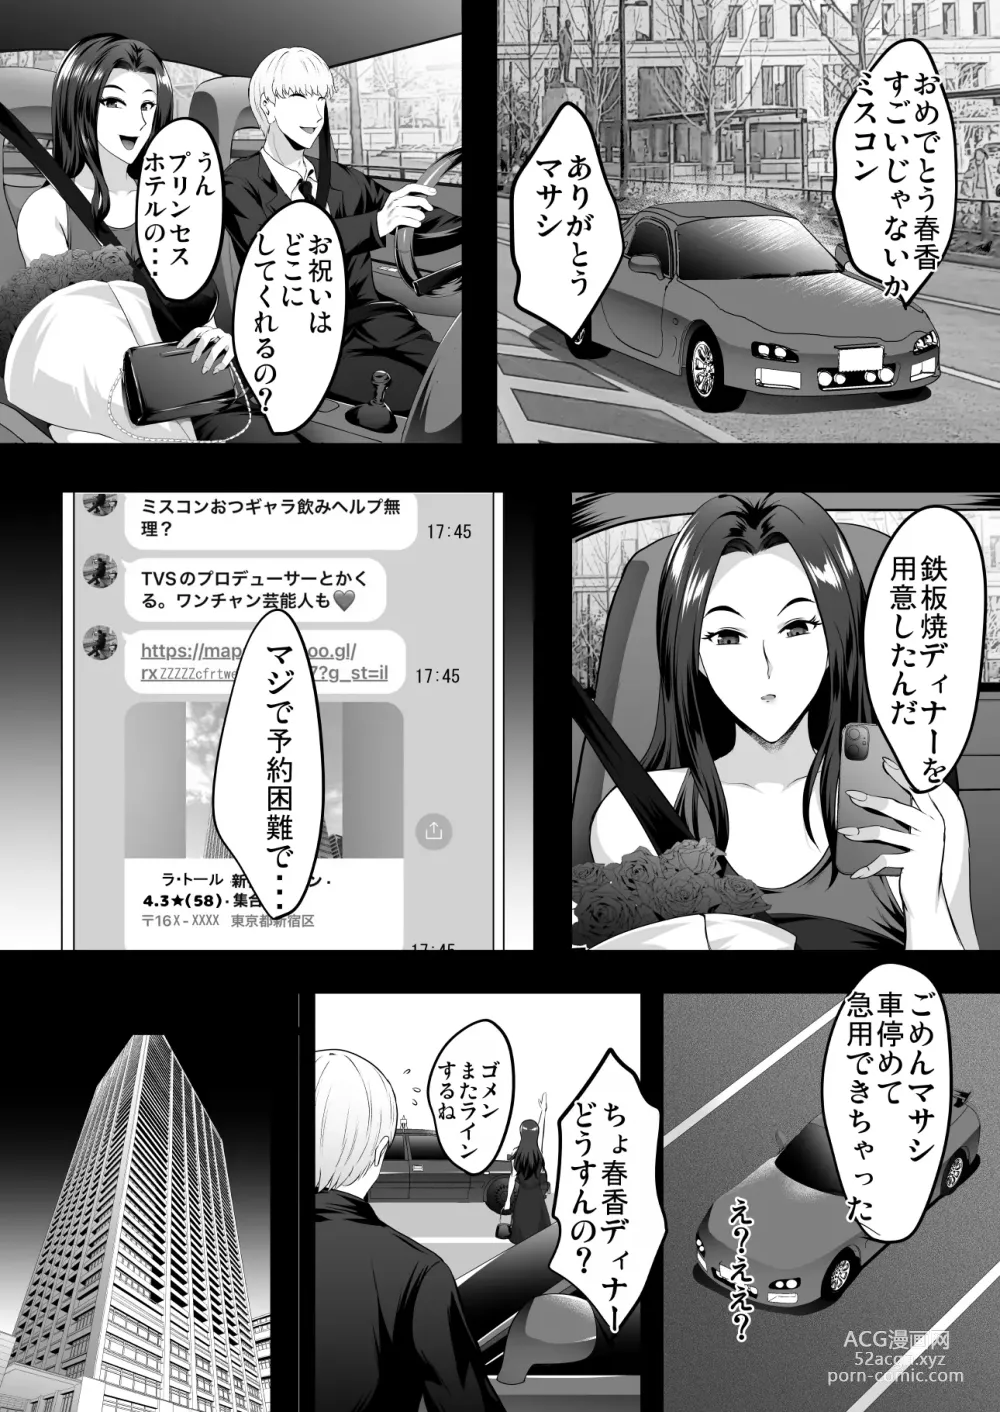 Page 25 of doujinshi Inyoku no Tou - the luxury tower of sexual desire